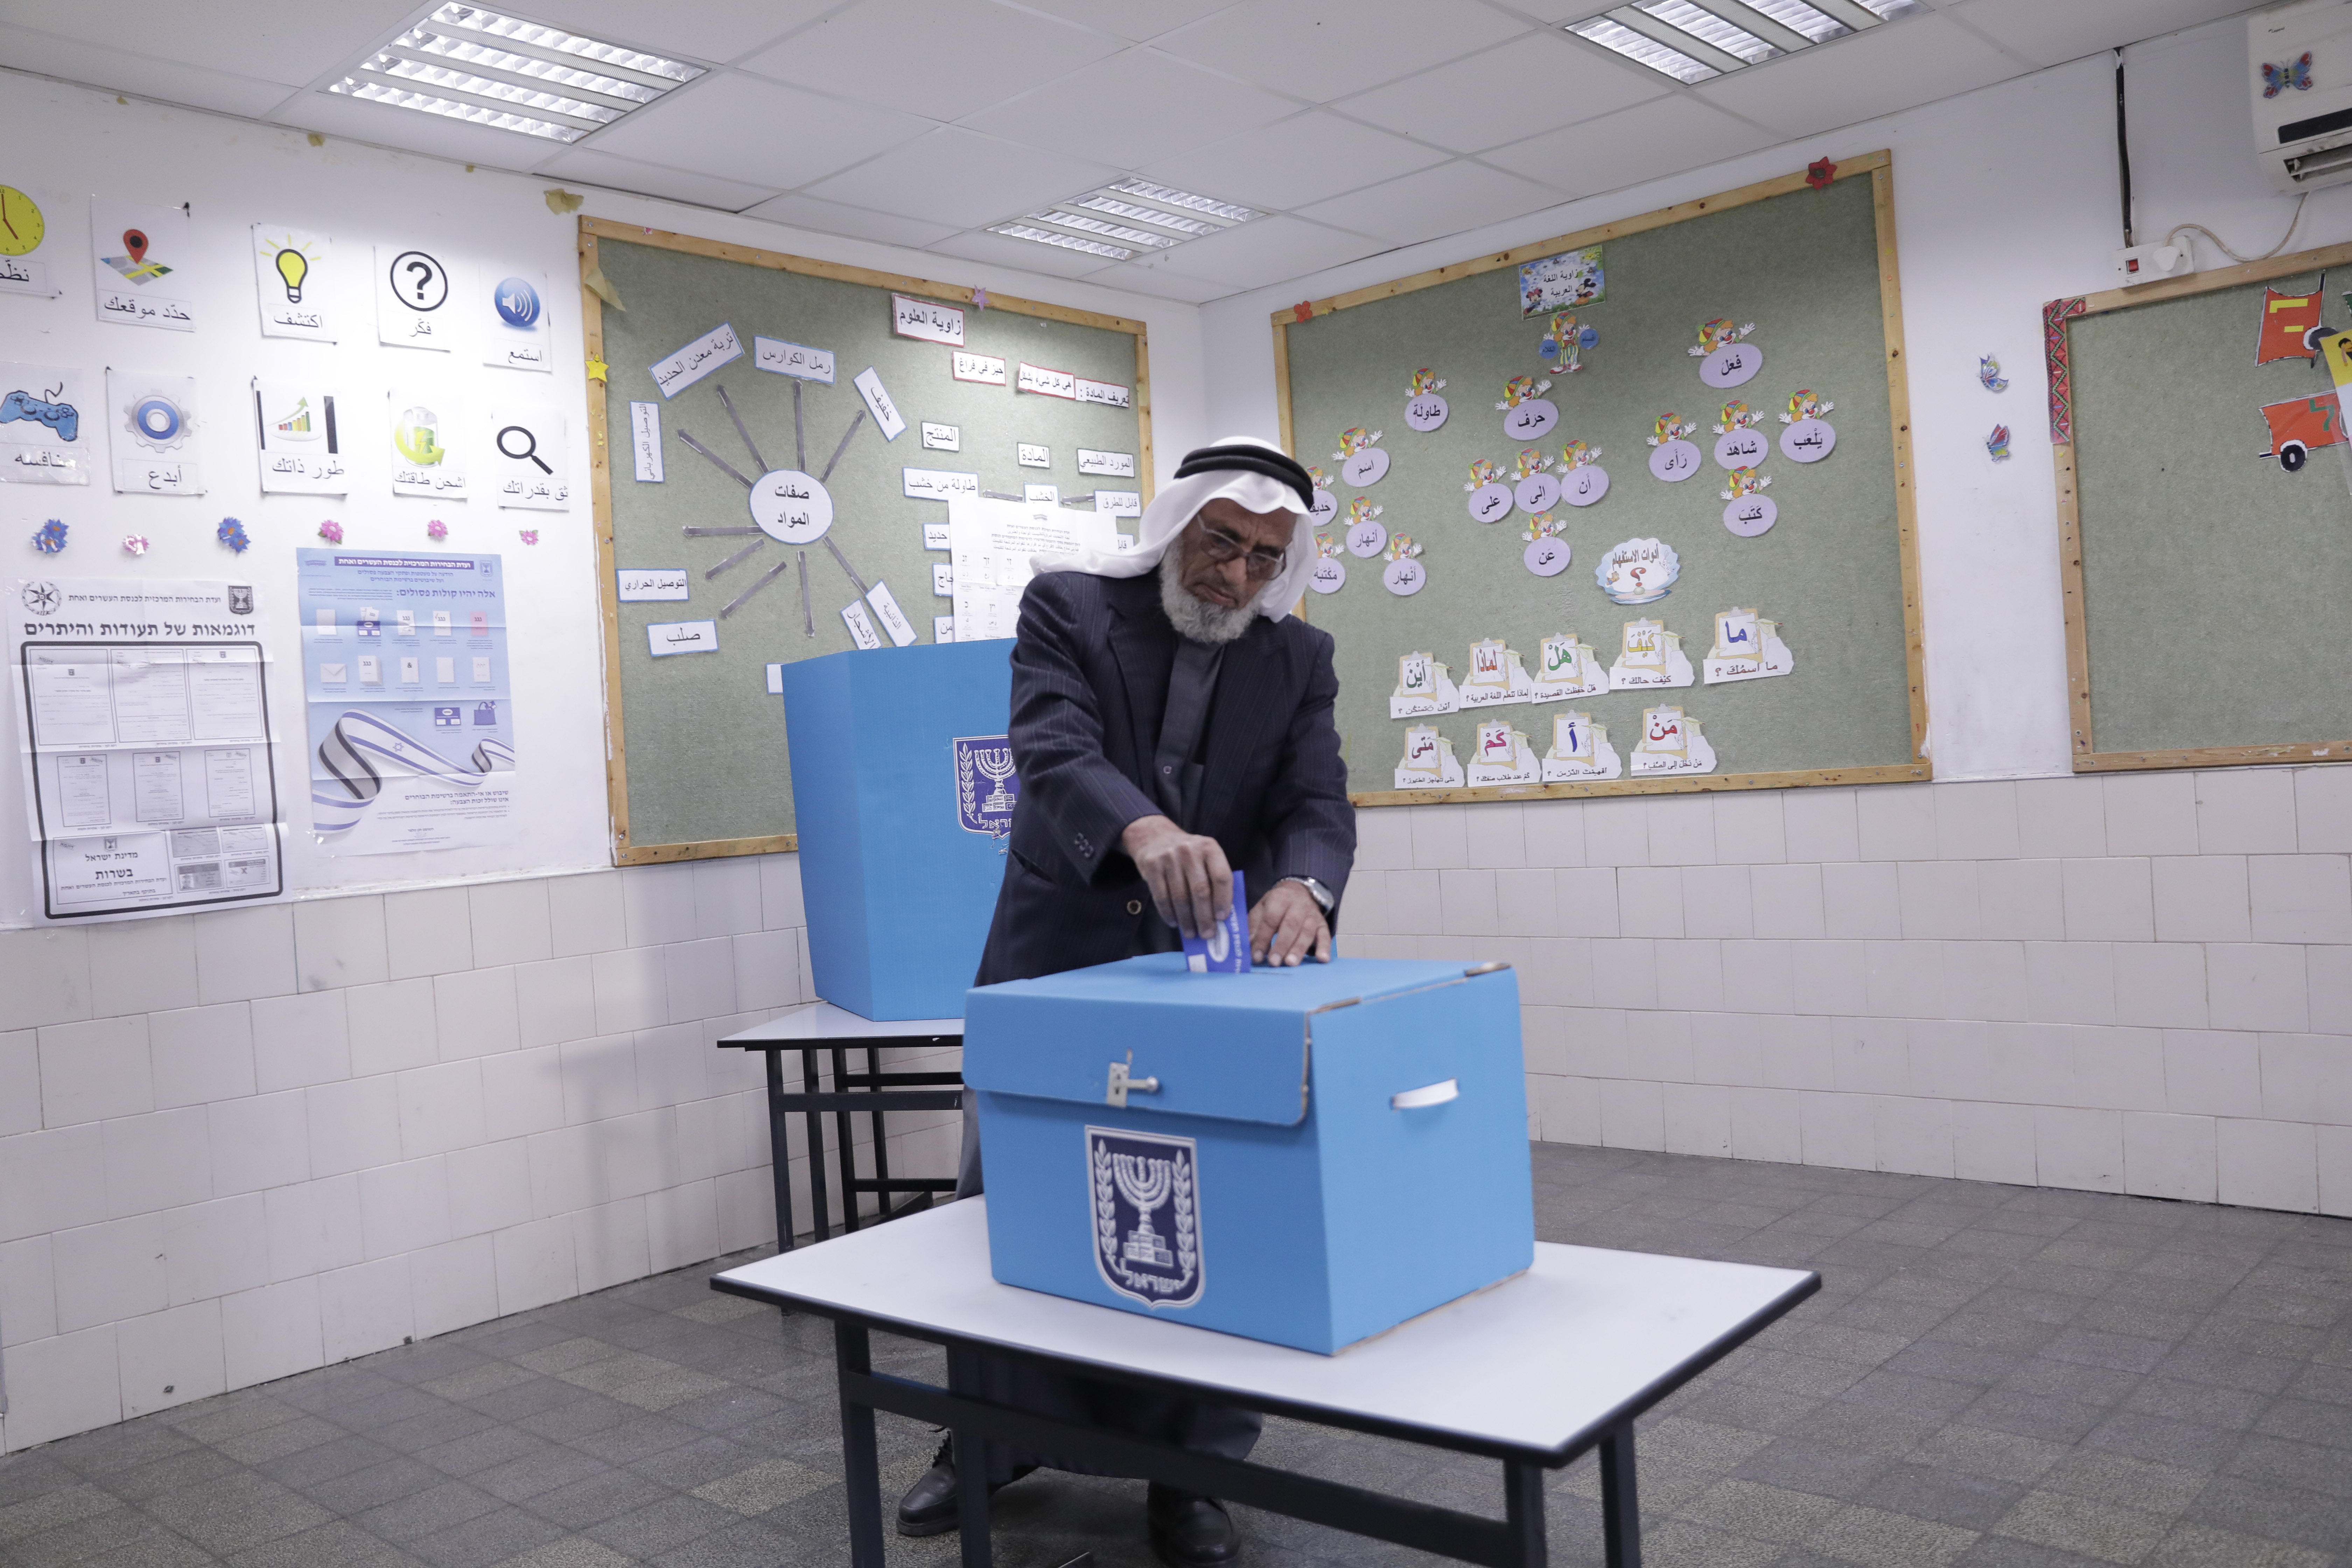 Israeli Bedouin votes during general elections in the city of Rahat, Tuesday, April 9, 2019. (AP Photo/Tsafrir Abayov)